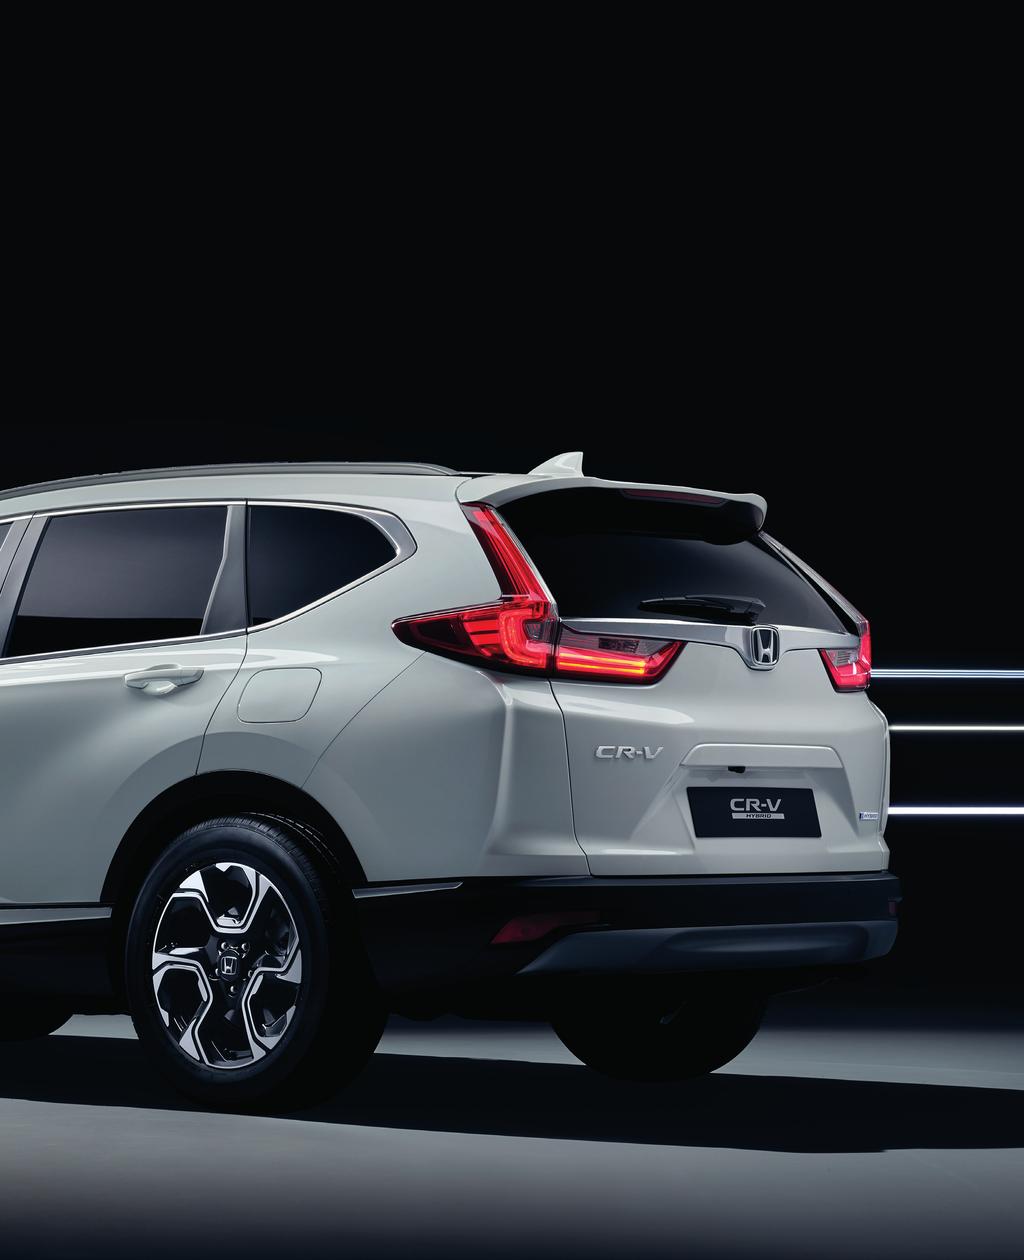 Car featured throughout is: CR-V 2.